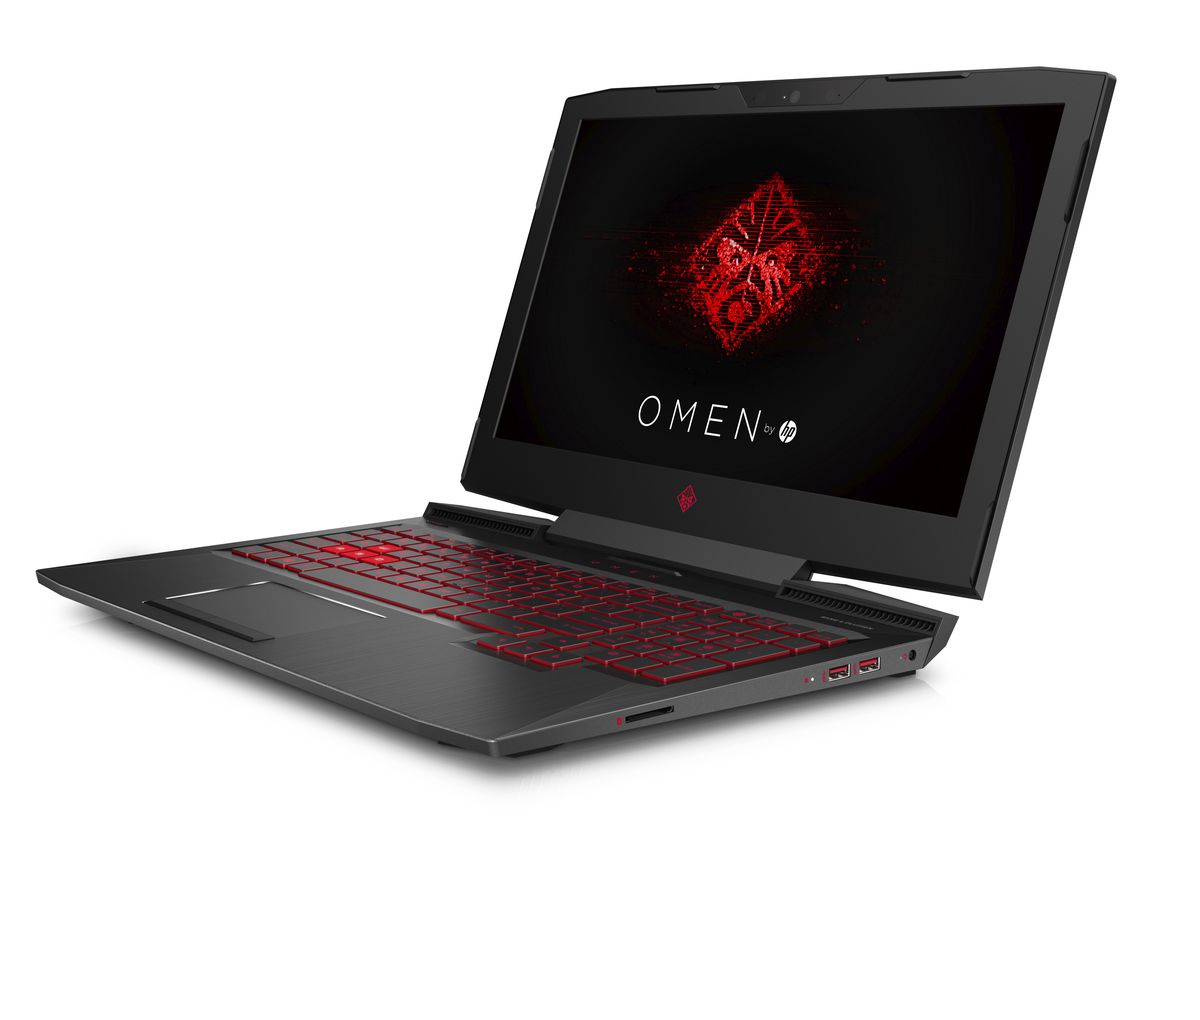 HP releases new Omen gaming PCs with AMD Ryzen and swappable hard